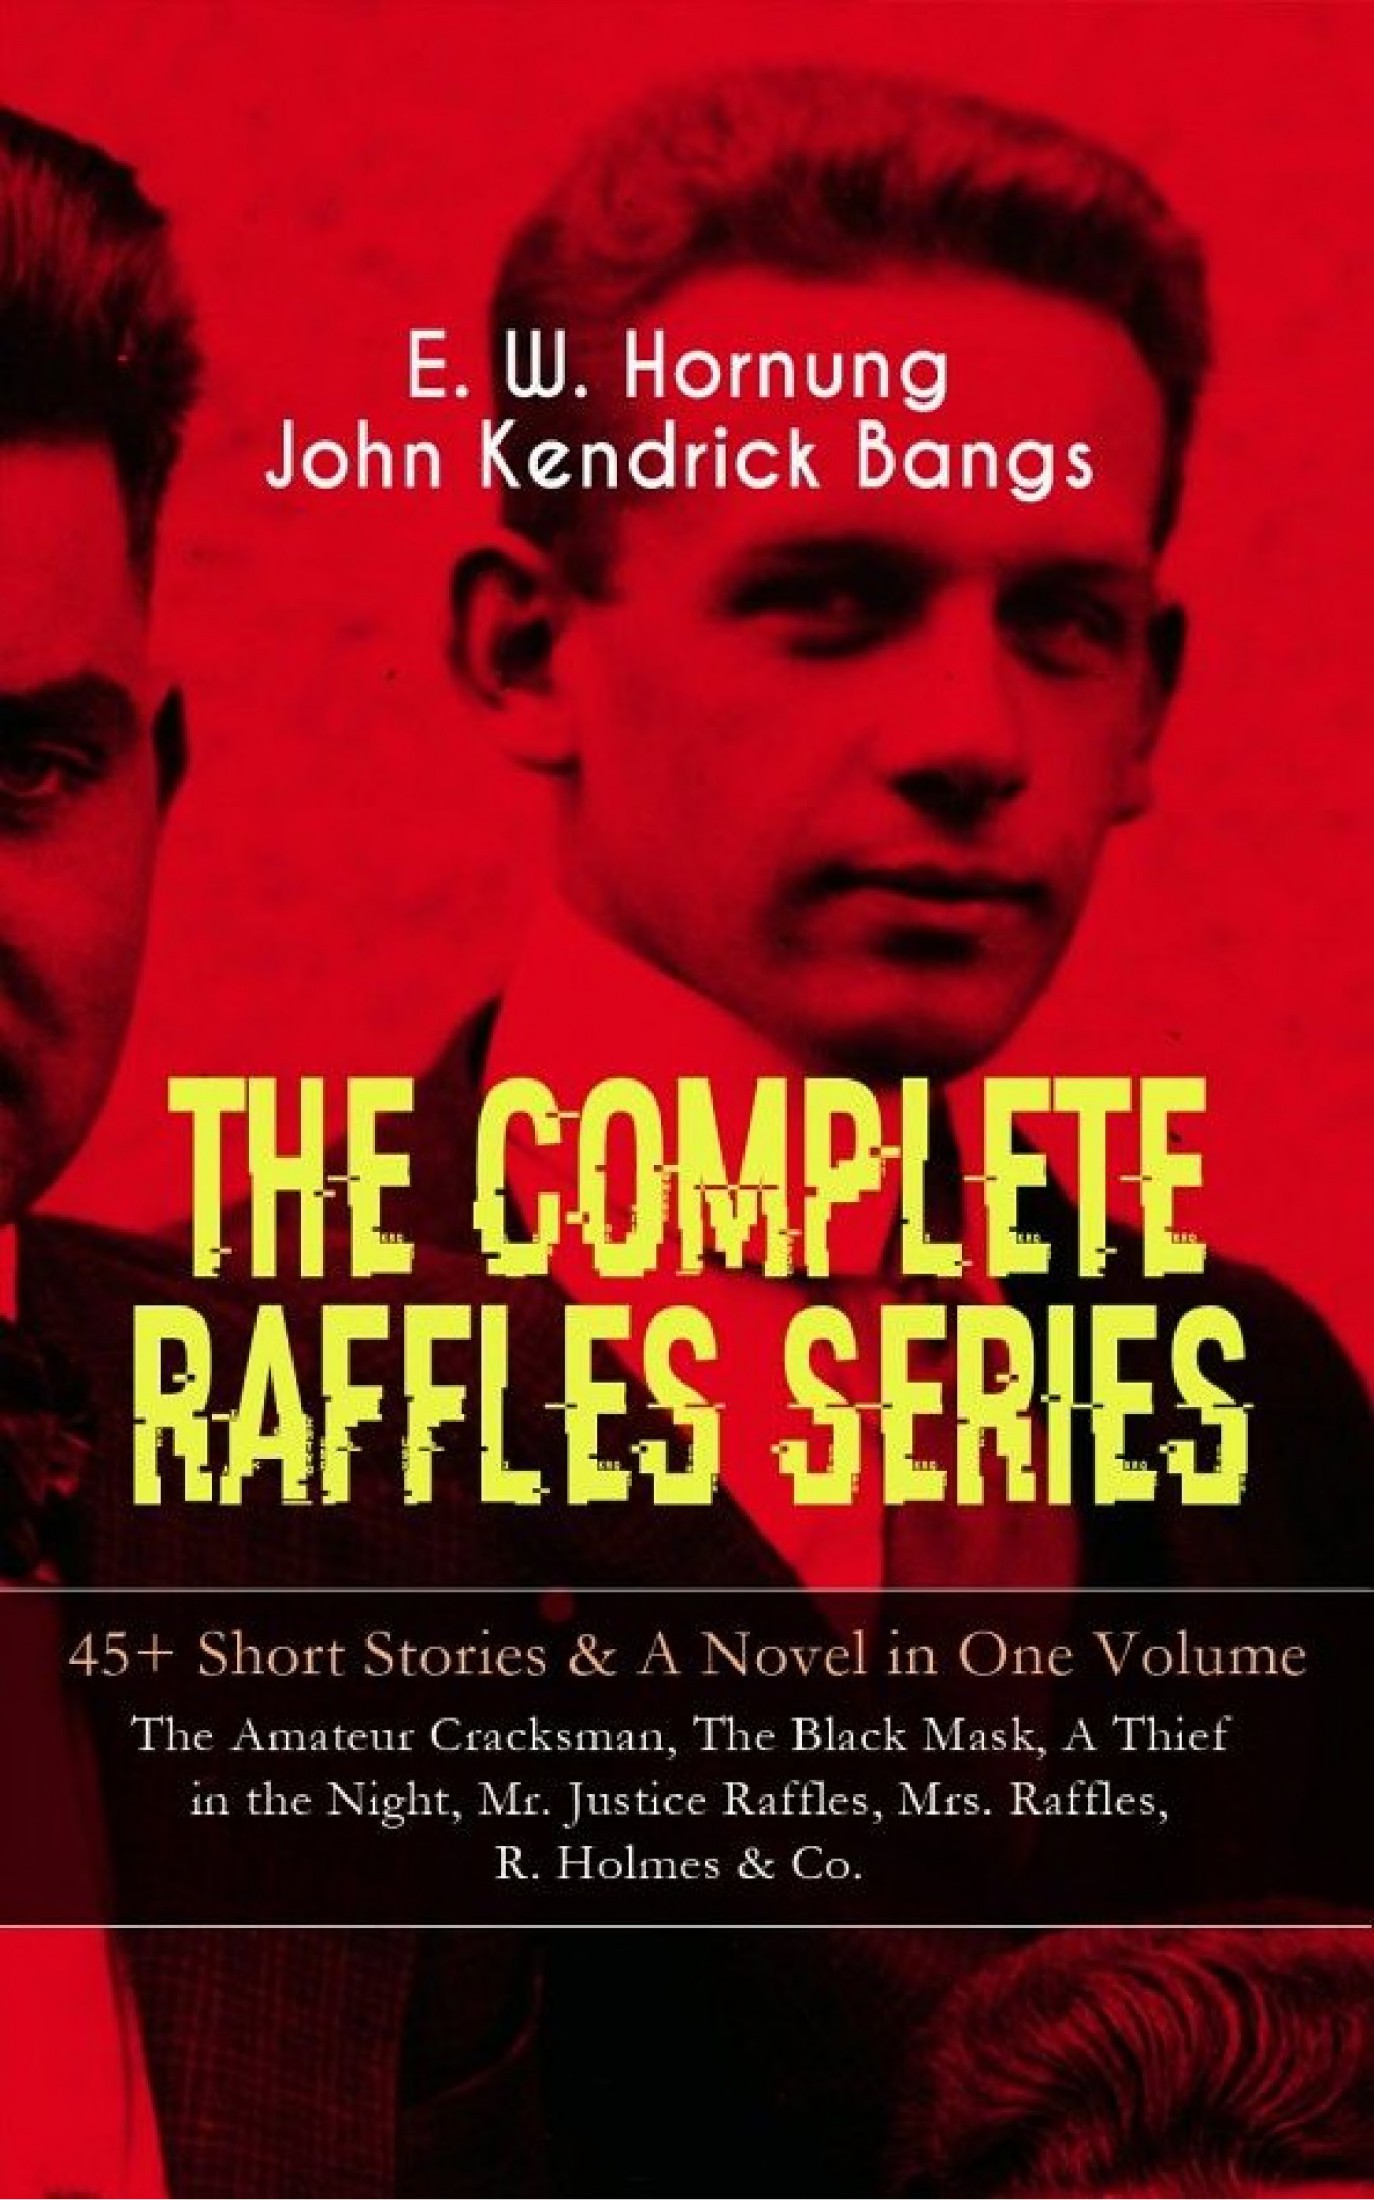 The COMPLETE RAFFLES SERIES – 45+ Short Stories & a Novel in One Volume: The Amateur Cracksman, the Black Mask, a Thief in the Night, Mr. Justice Raffles, Mrs. Raffles, R. Holmes & Co.: The Adventures of A. J. Raffles, a Gentleman-Thief & Crime Tales of the Amateur Cracksman’s Family